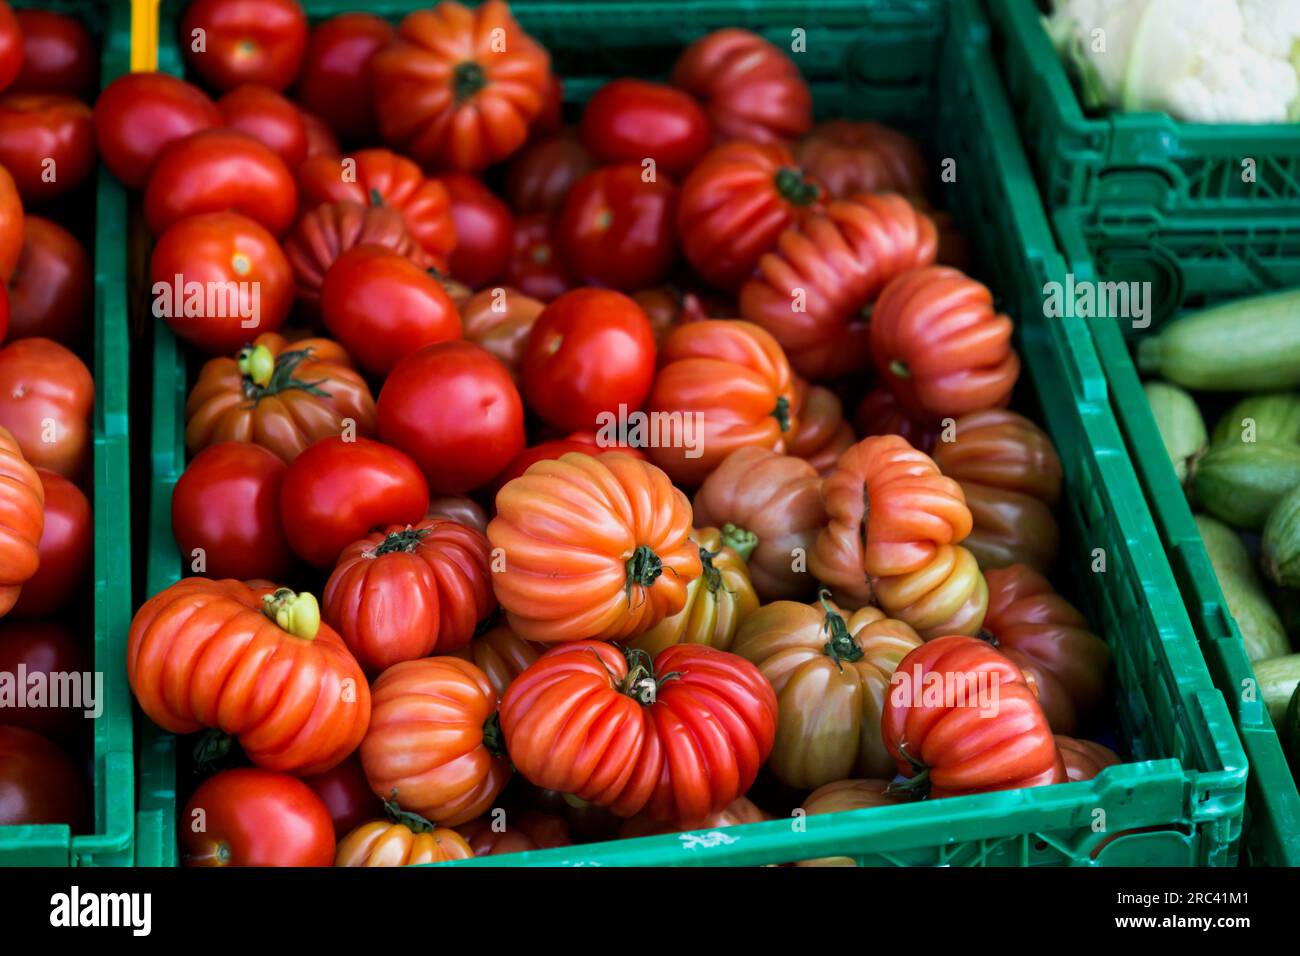 Pile of coeur du boef tomatoes in a green basket, local farmers market Stock Photo